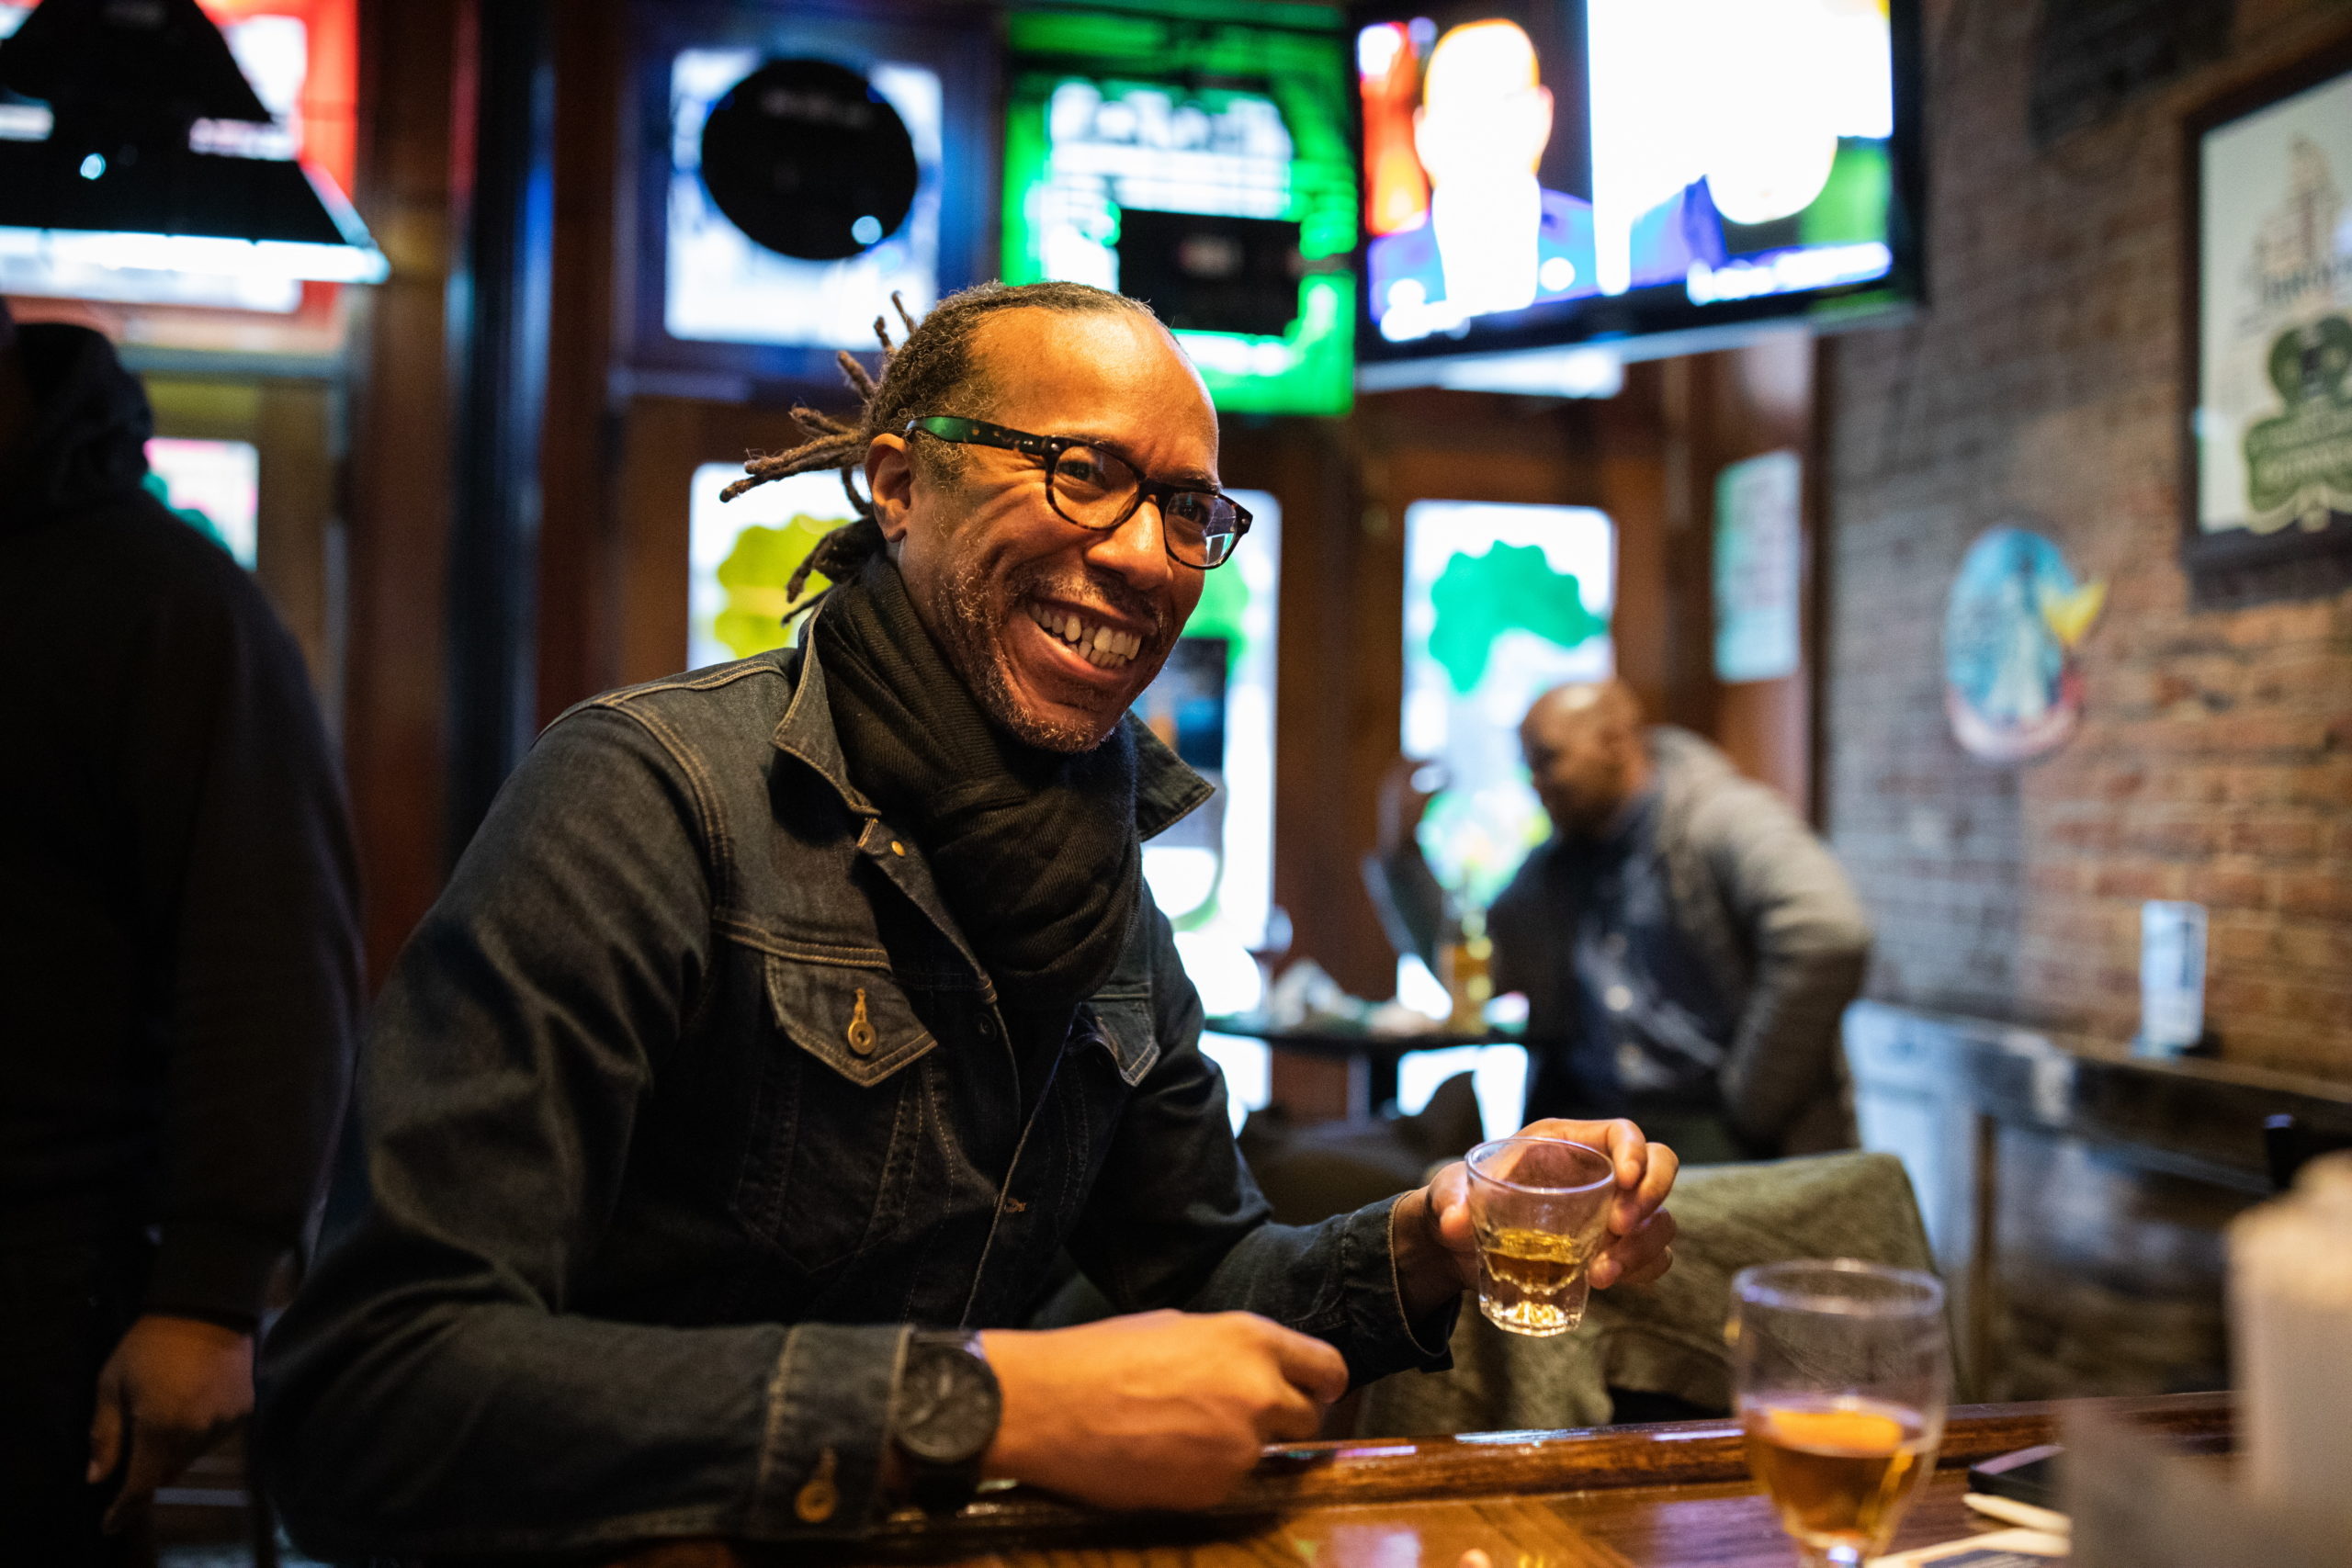 Patron Hayden Long sits at the bar of O’Keefe’s in Downtown Brooklyn on March 16, 2020. Gov. Andrew Cuomo previously ordered all bars and restaurants would have to close by 8 p.m. on the 16th. They could continue with takeout and delivery. Photo: Paul Frangipane/Brooklyn Eagle